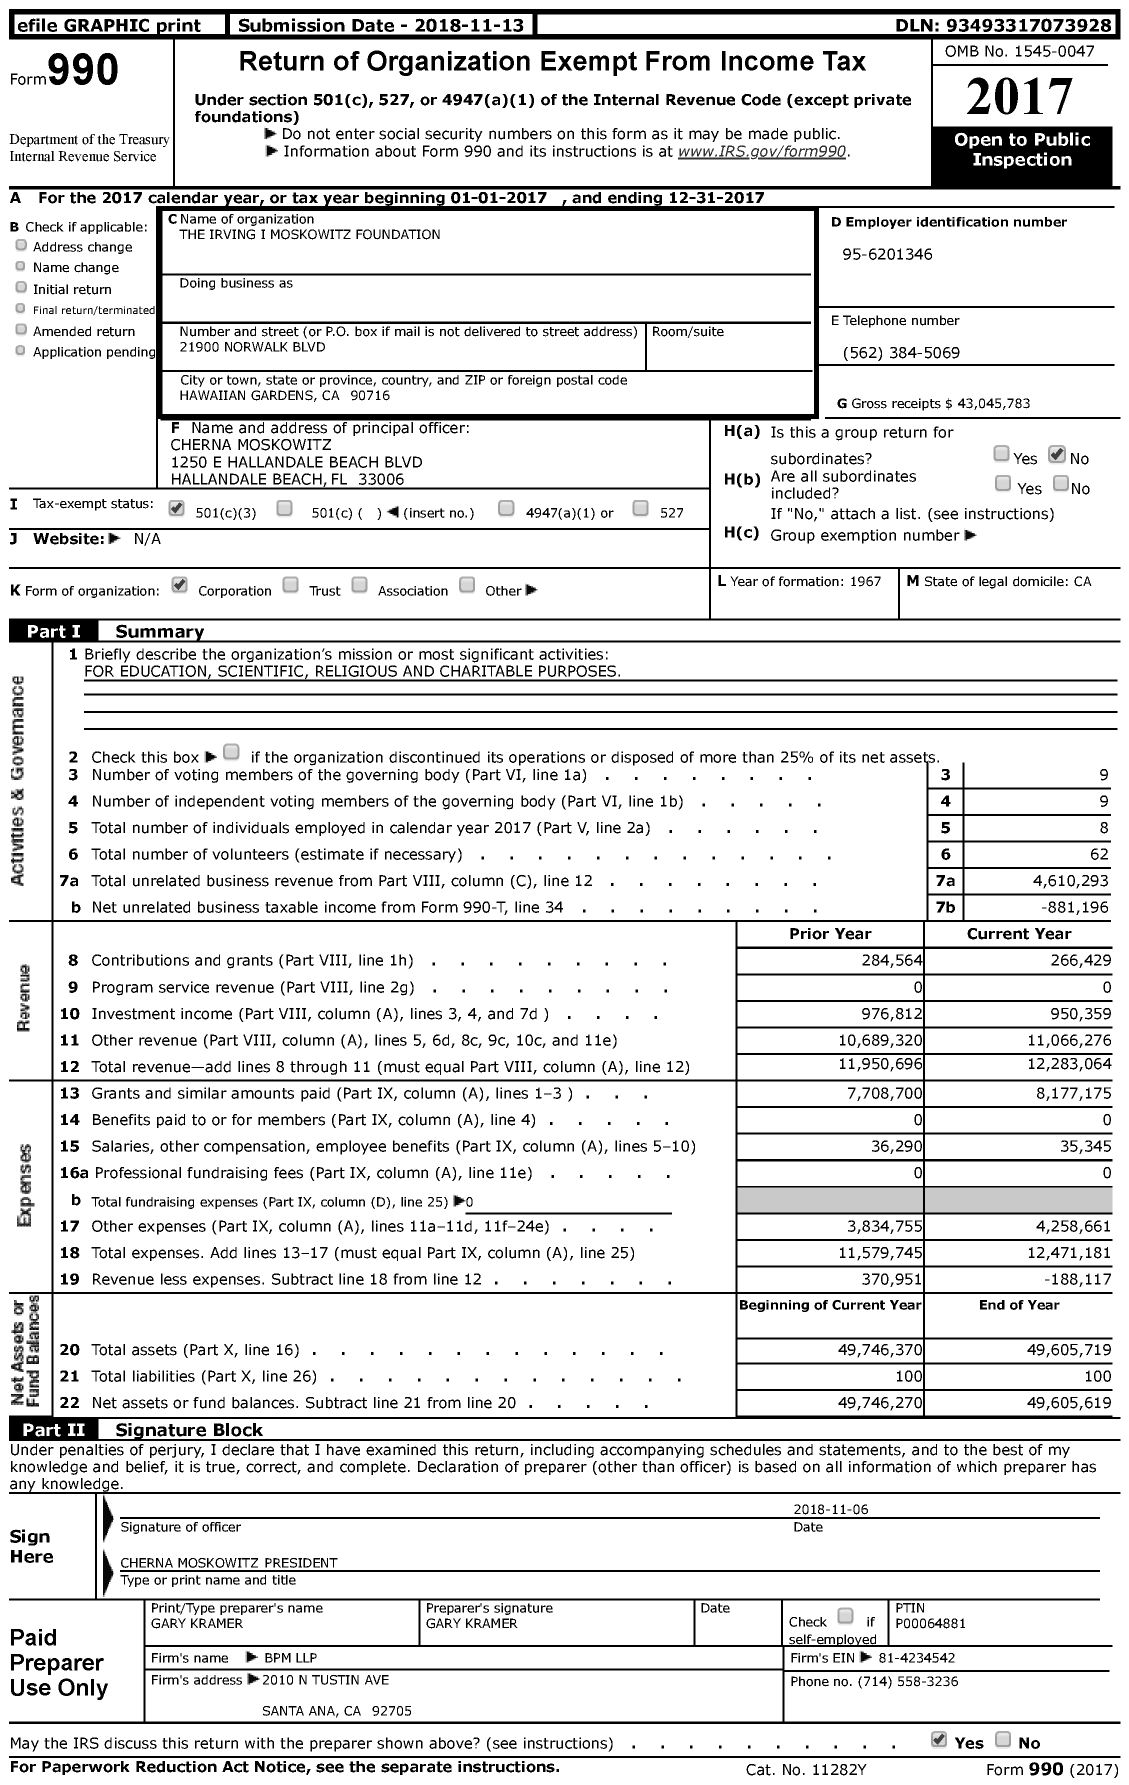 Image of first page of 2017 Form 990 for Irving I Moskowitz Foundation